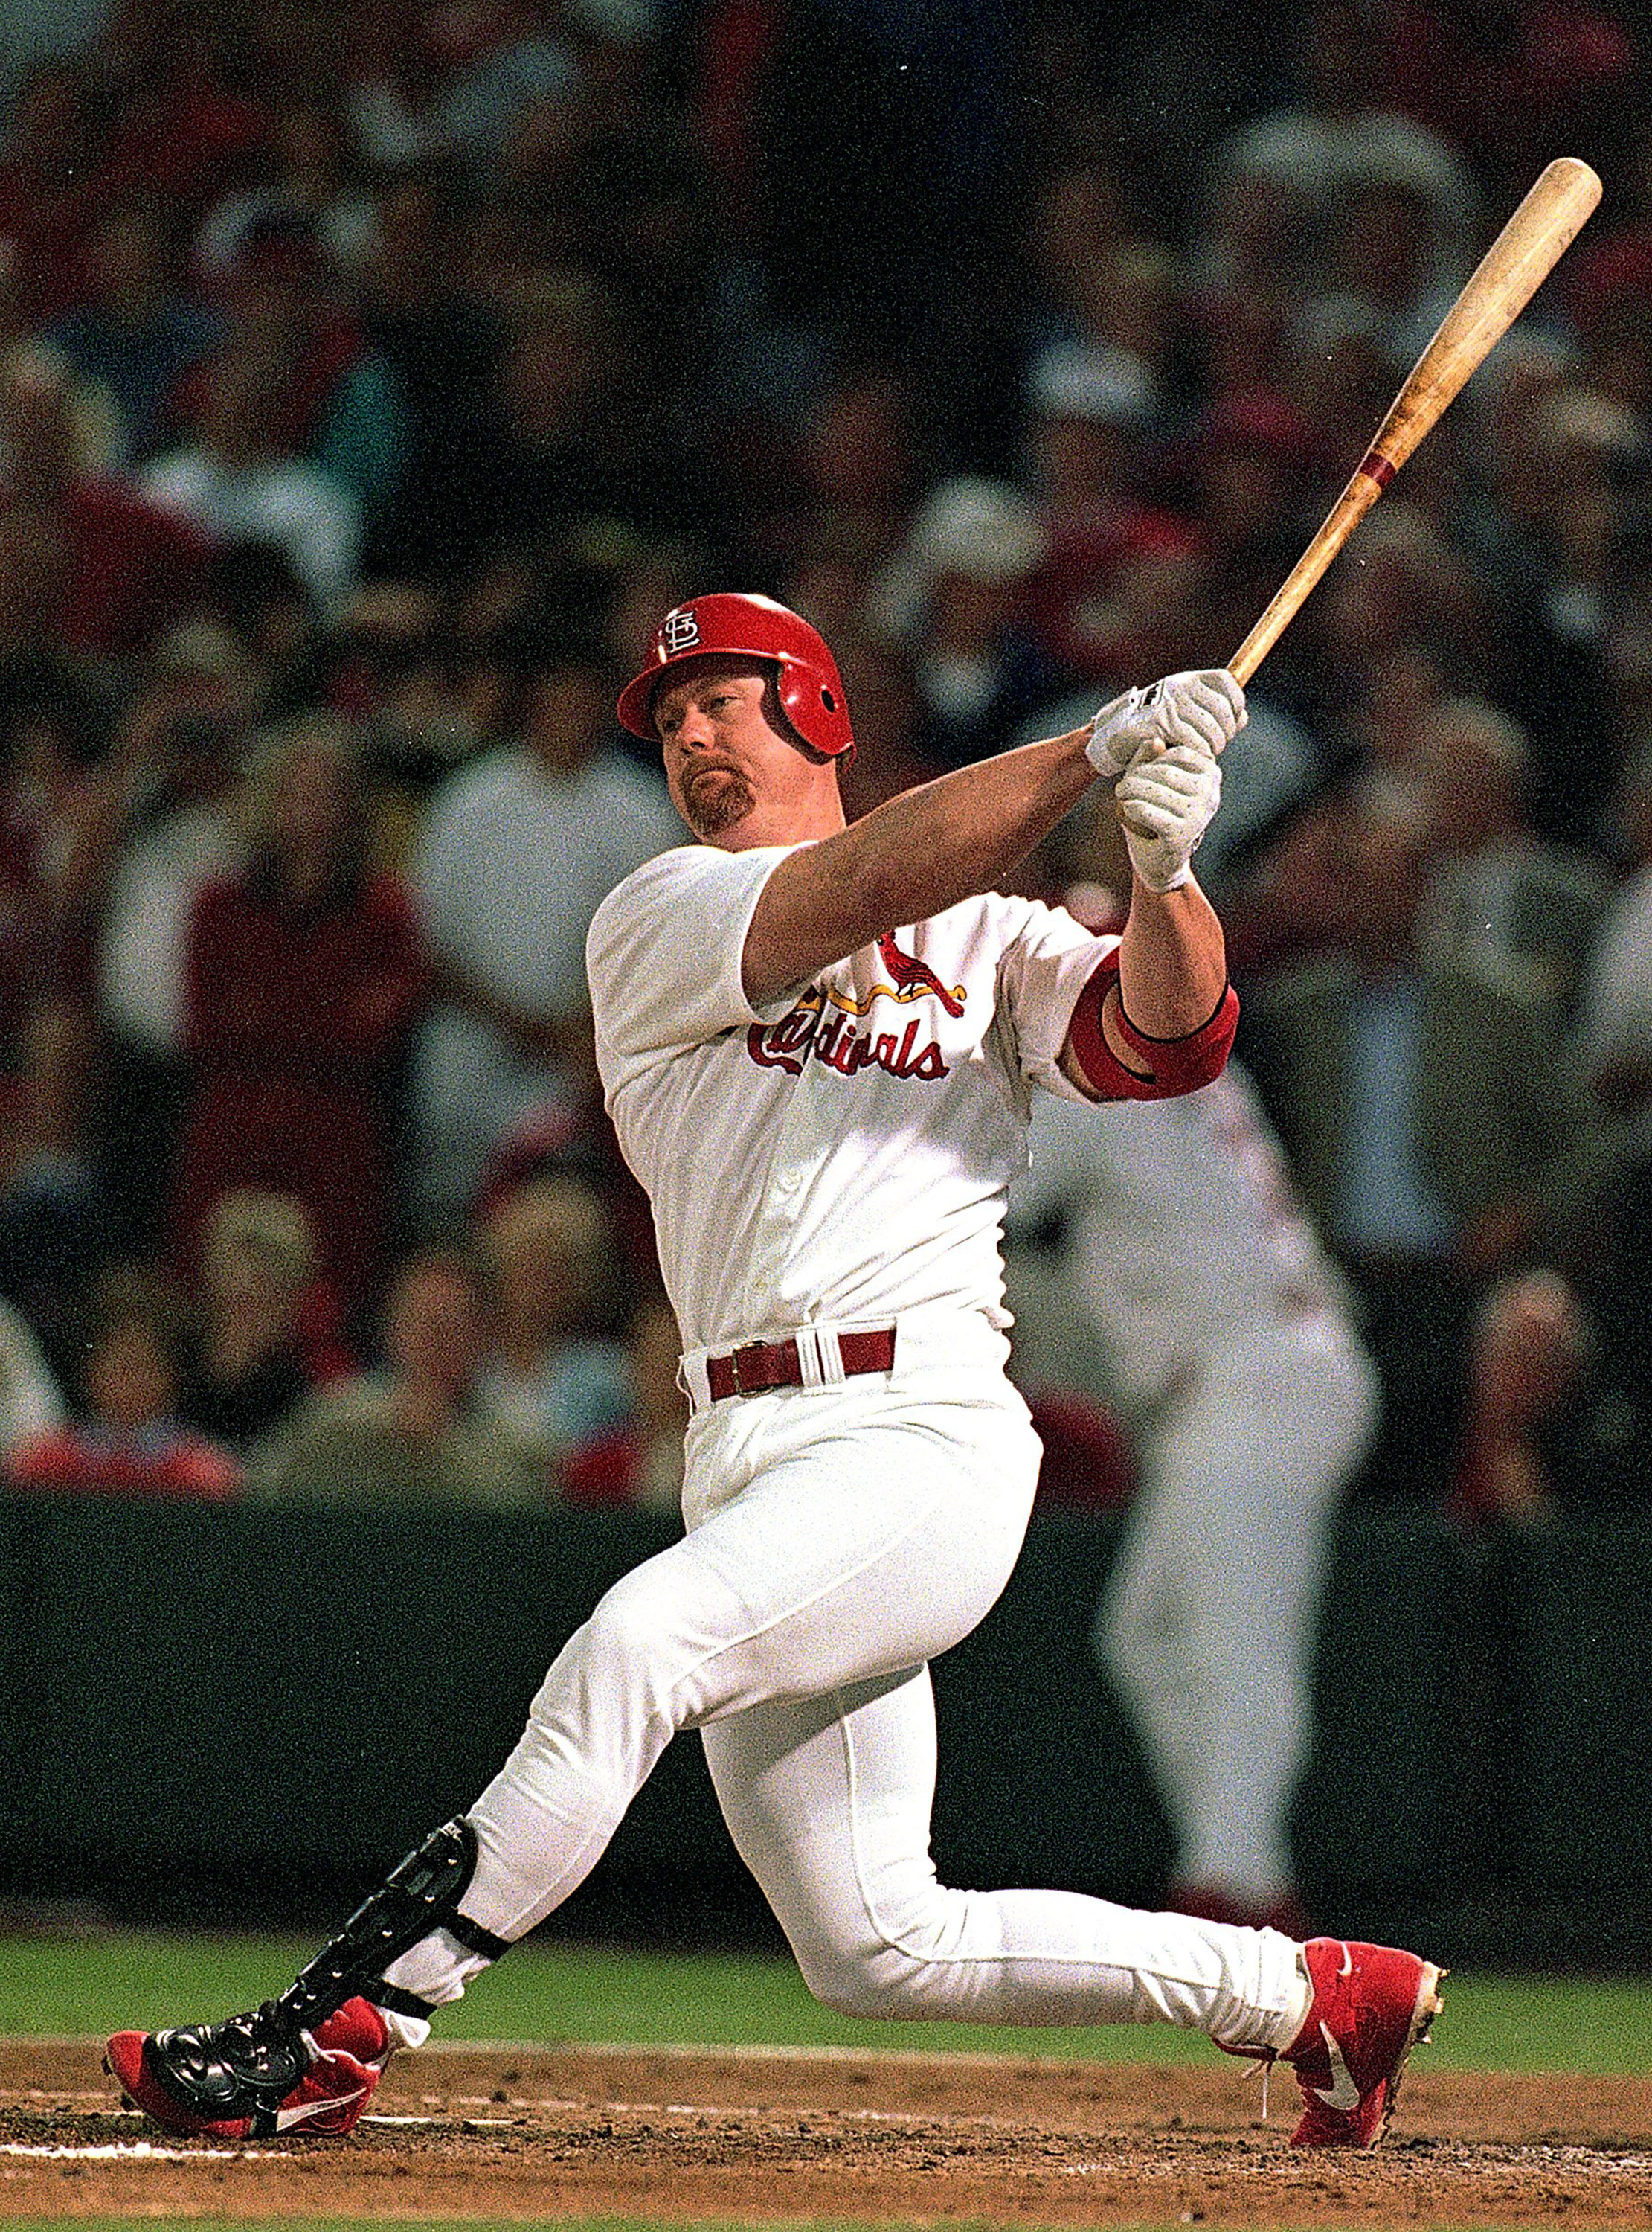 23 Sep 1998: (FILE PHOTO)  Mark McGwire #25 of the St. Louis Cardinals hits the ball during the game against the Houston Astros at Busch Stadium in St. Louis, Missouri. According to reports January 11, 2010, McGwire has admitted to steroid use during whil